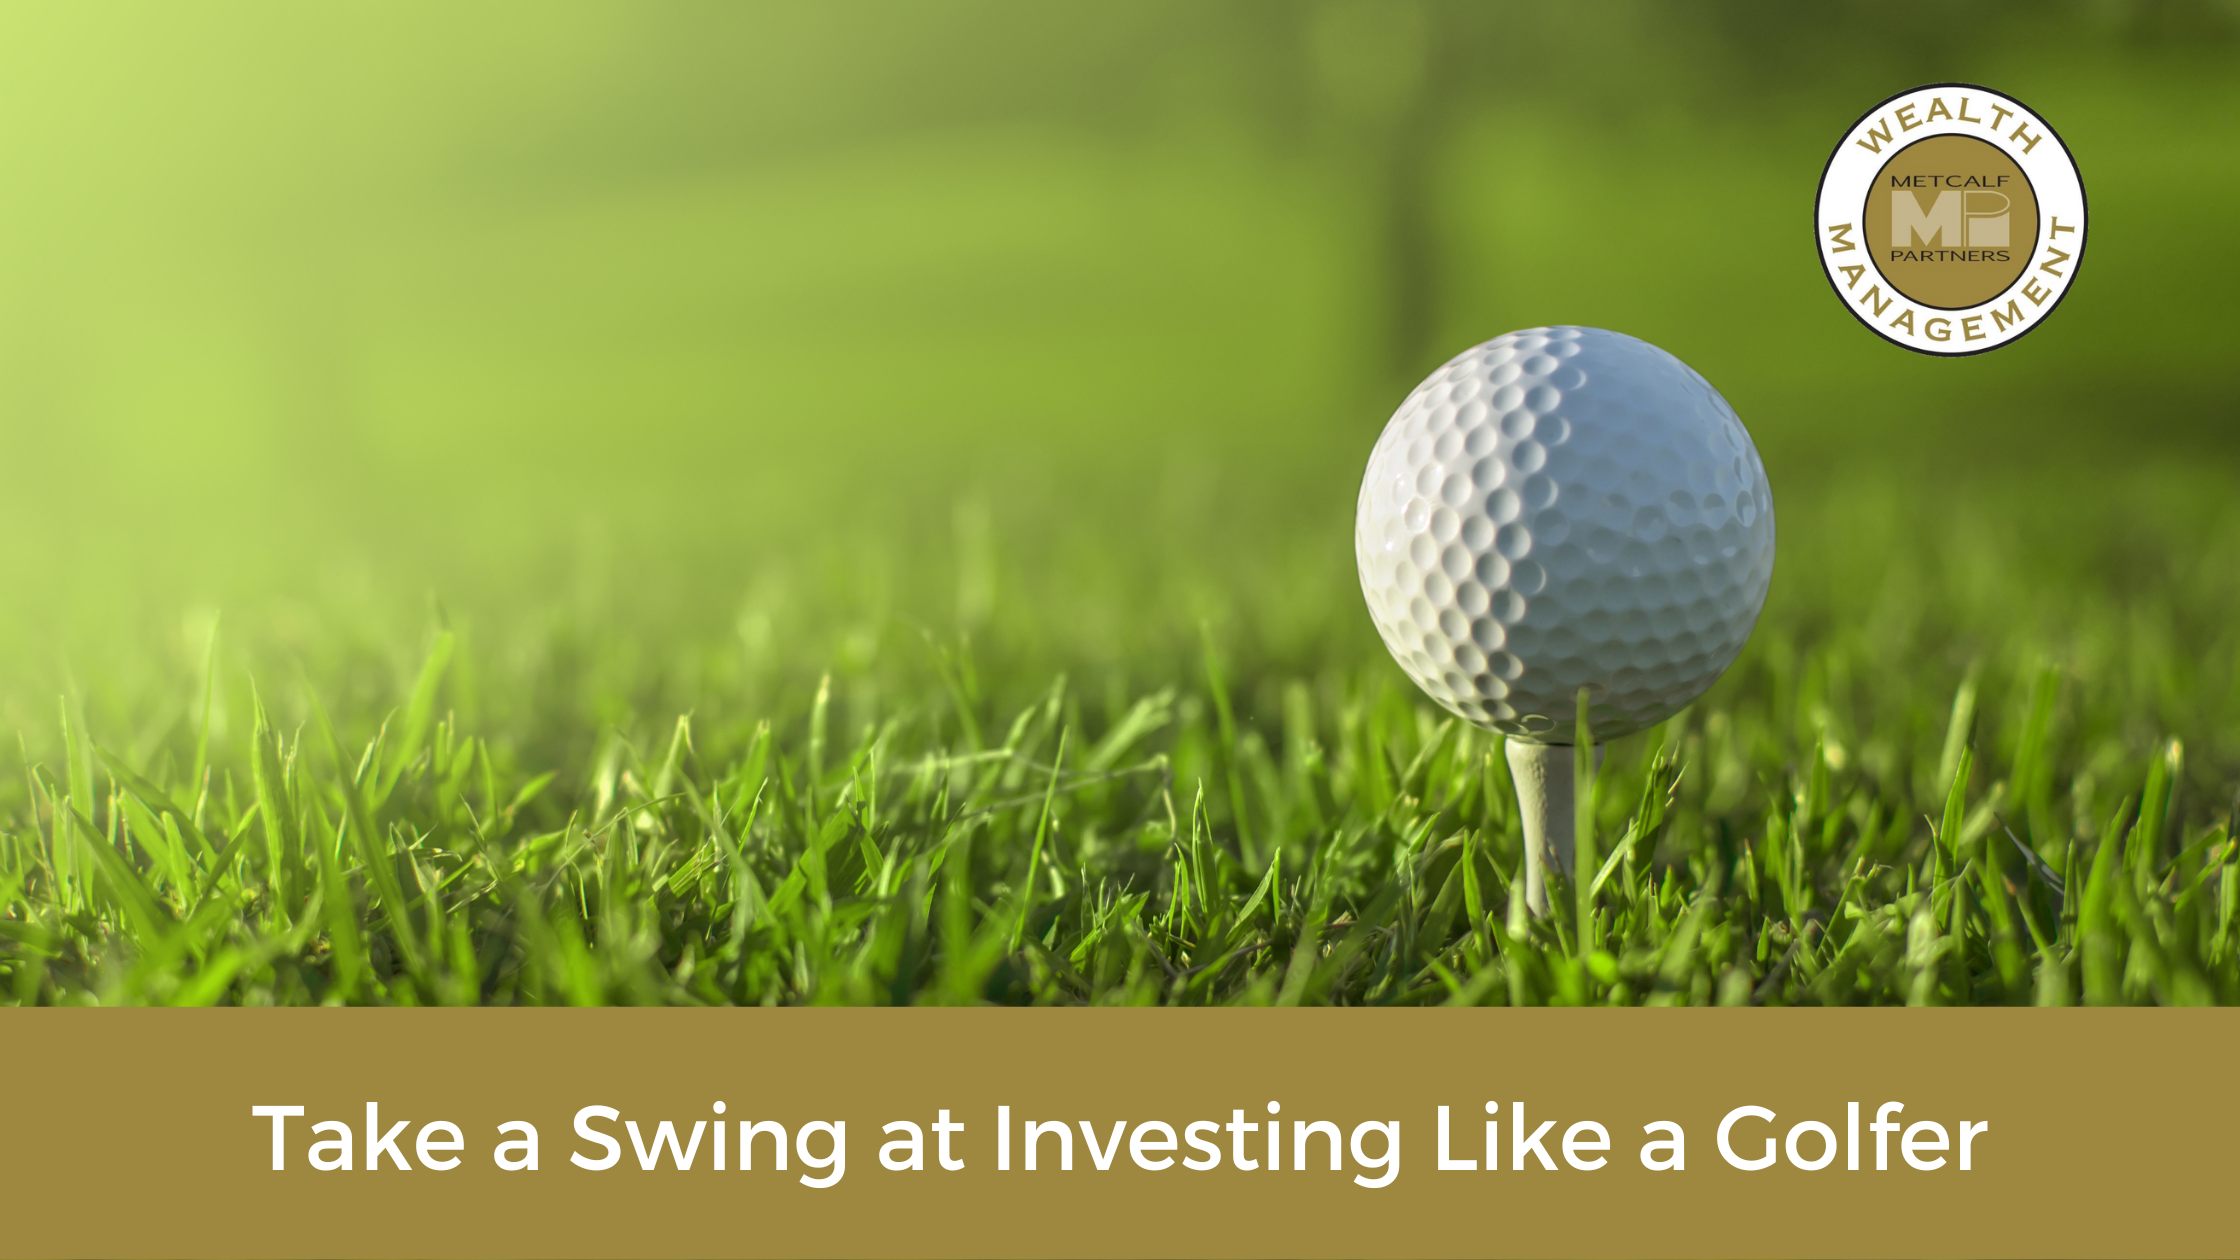 Featured image for “Take a Swing at Investing Like a Golfer”